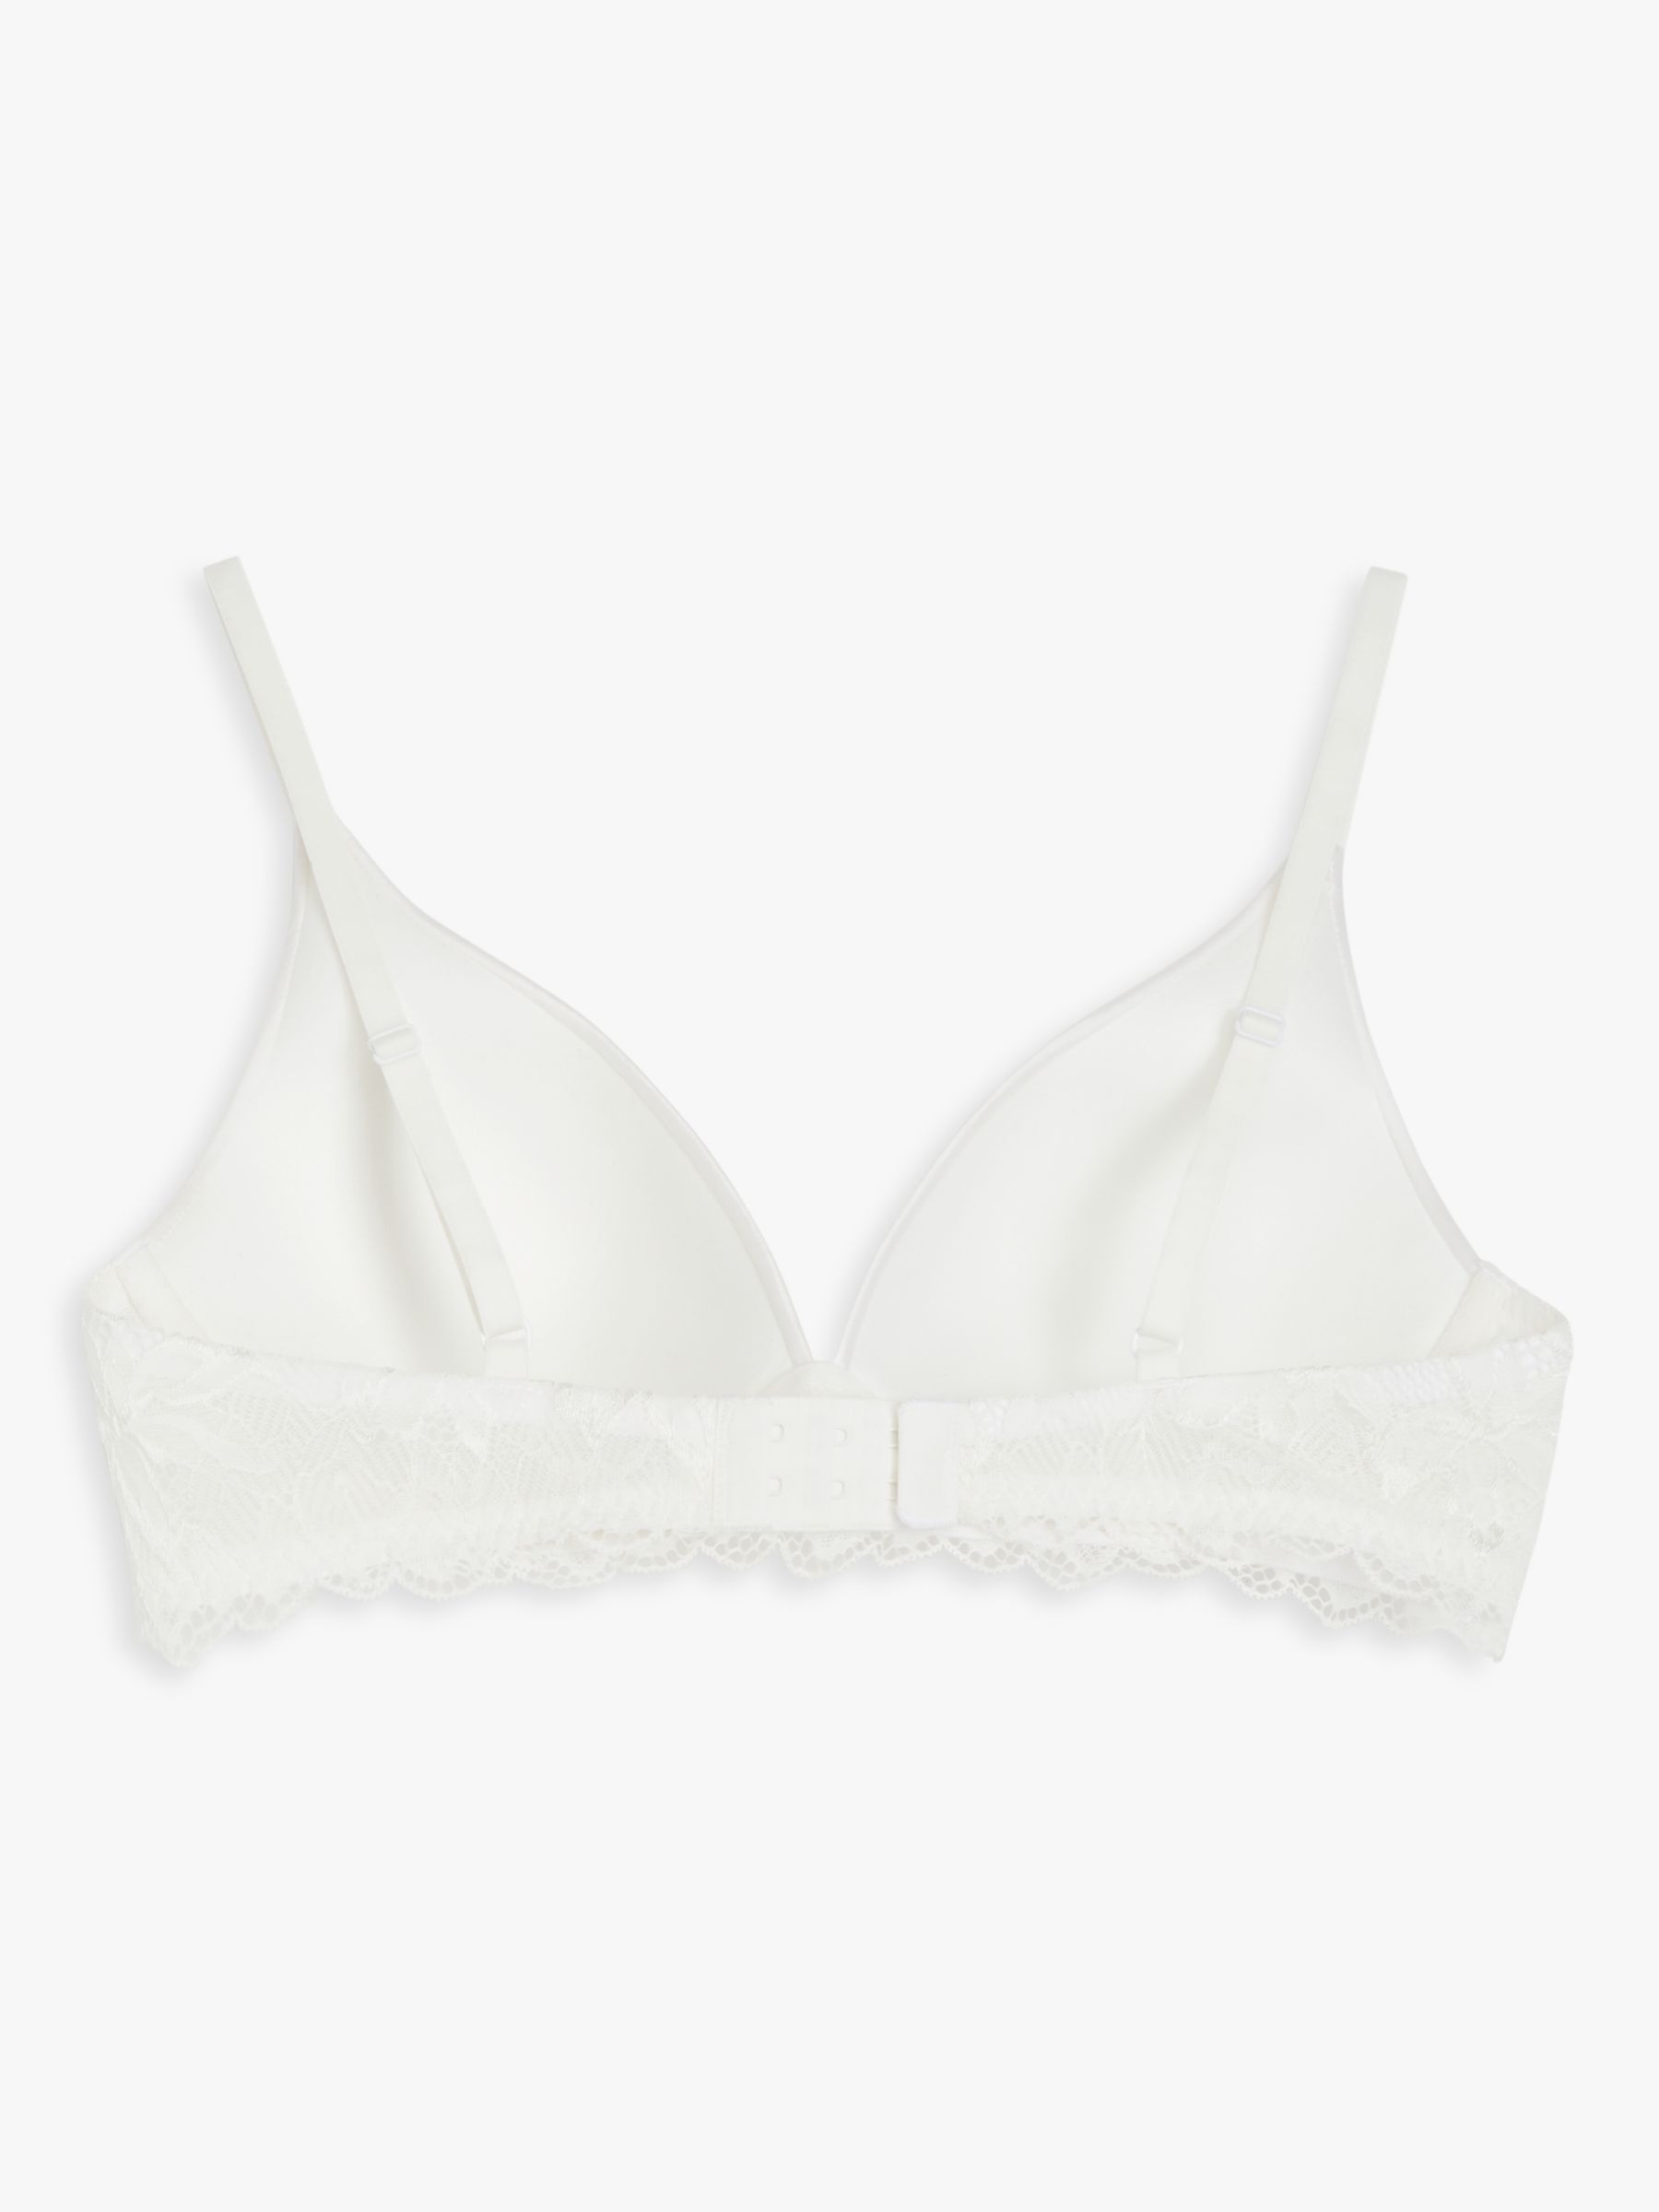 Buy John Lewis ANYDAY Willow Lace Detail Non-Wired Bra Online at johnlewis.com